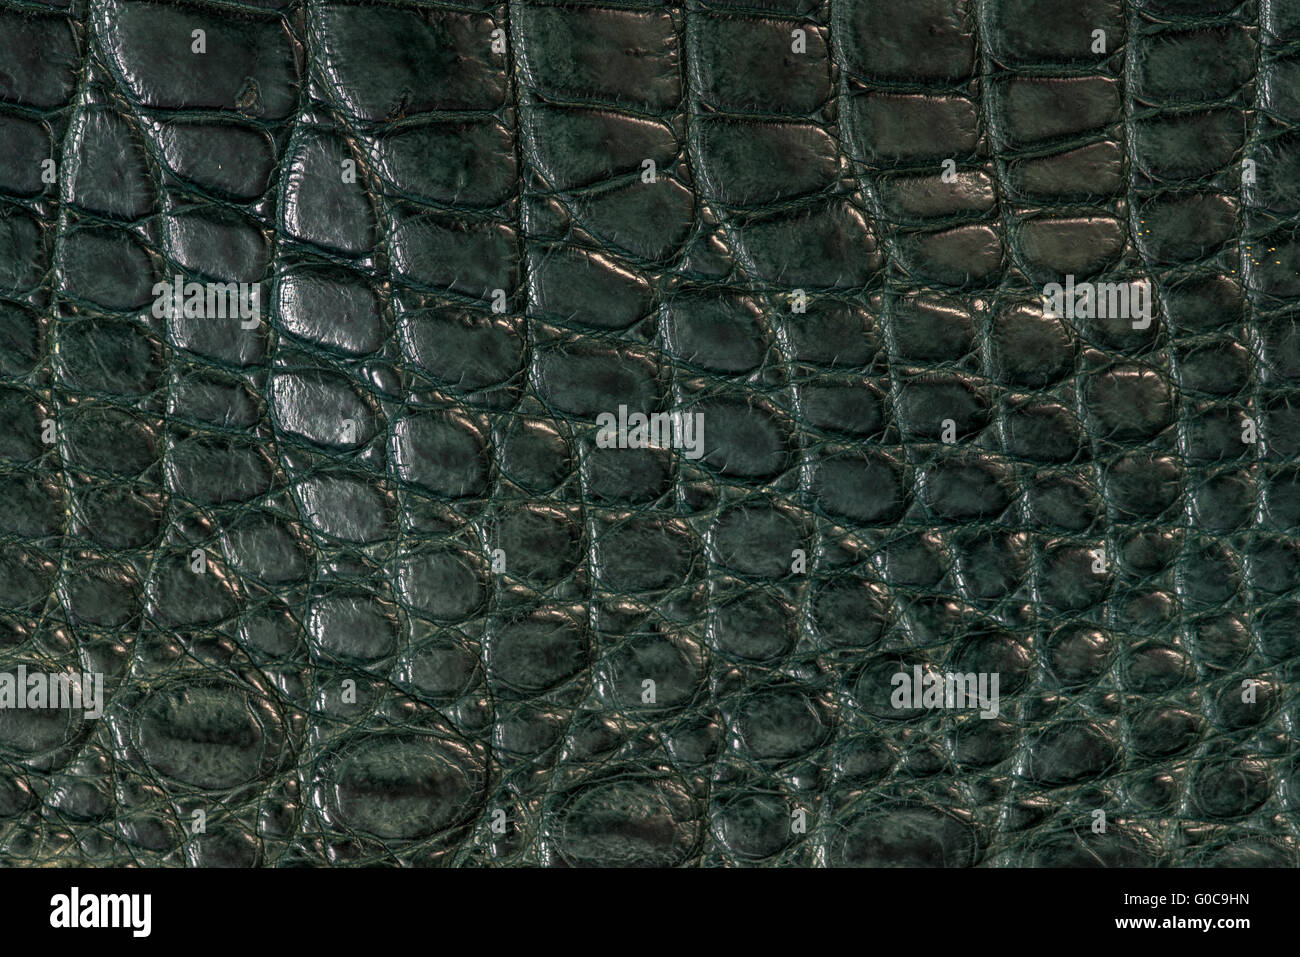 Alligator, leather, hide, skins in green colour Stock Photo